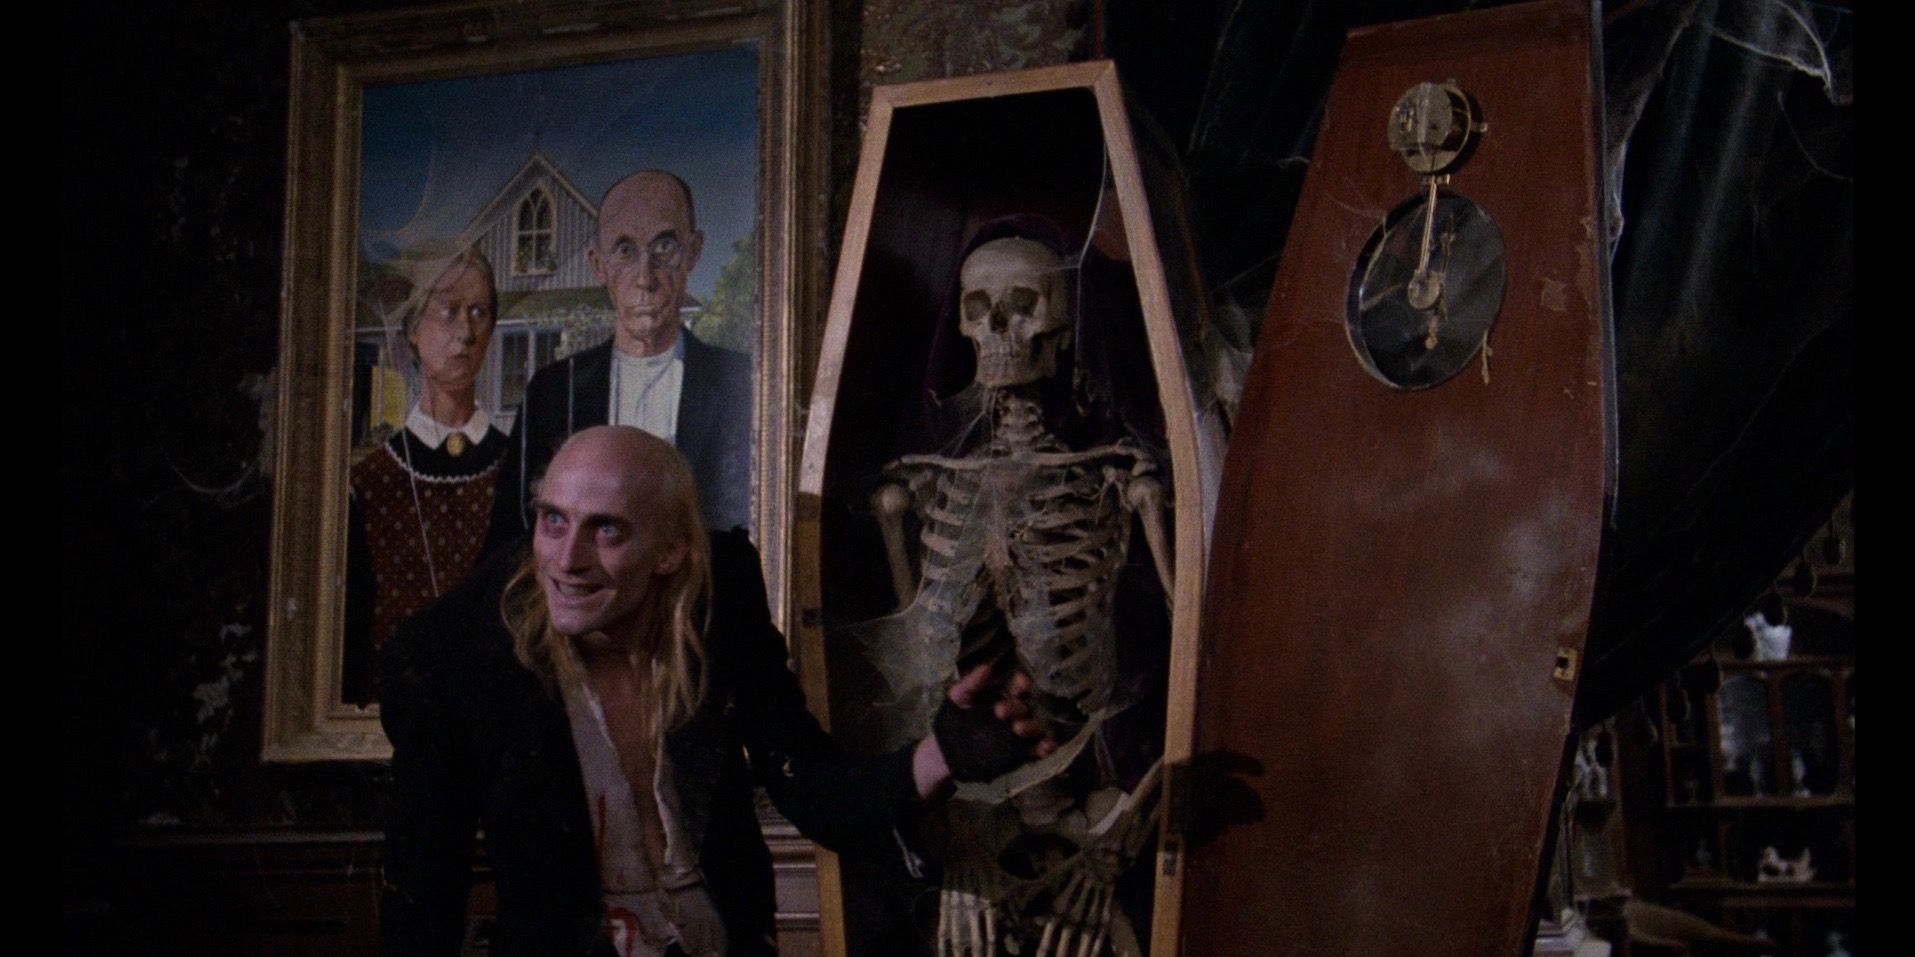 Richard O'Brien as Riff Raff in The Rocky Horror Picture Show